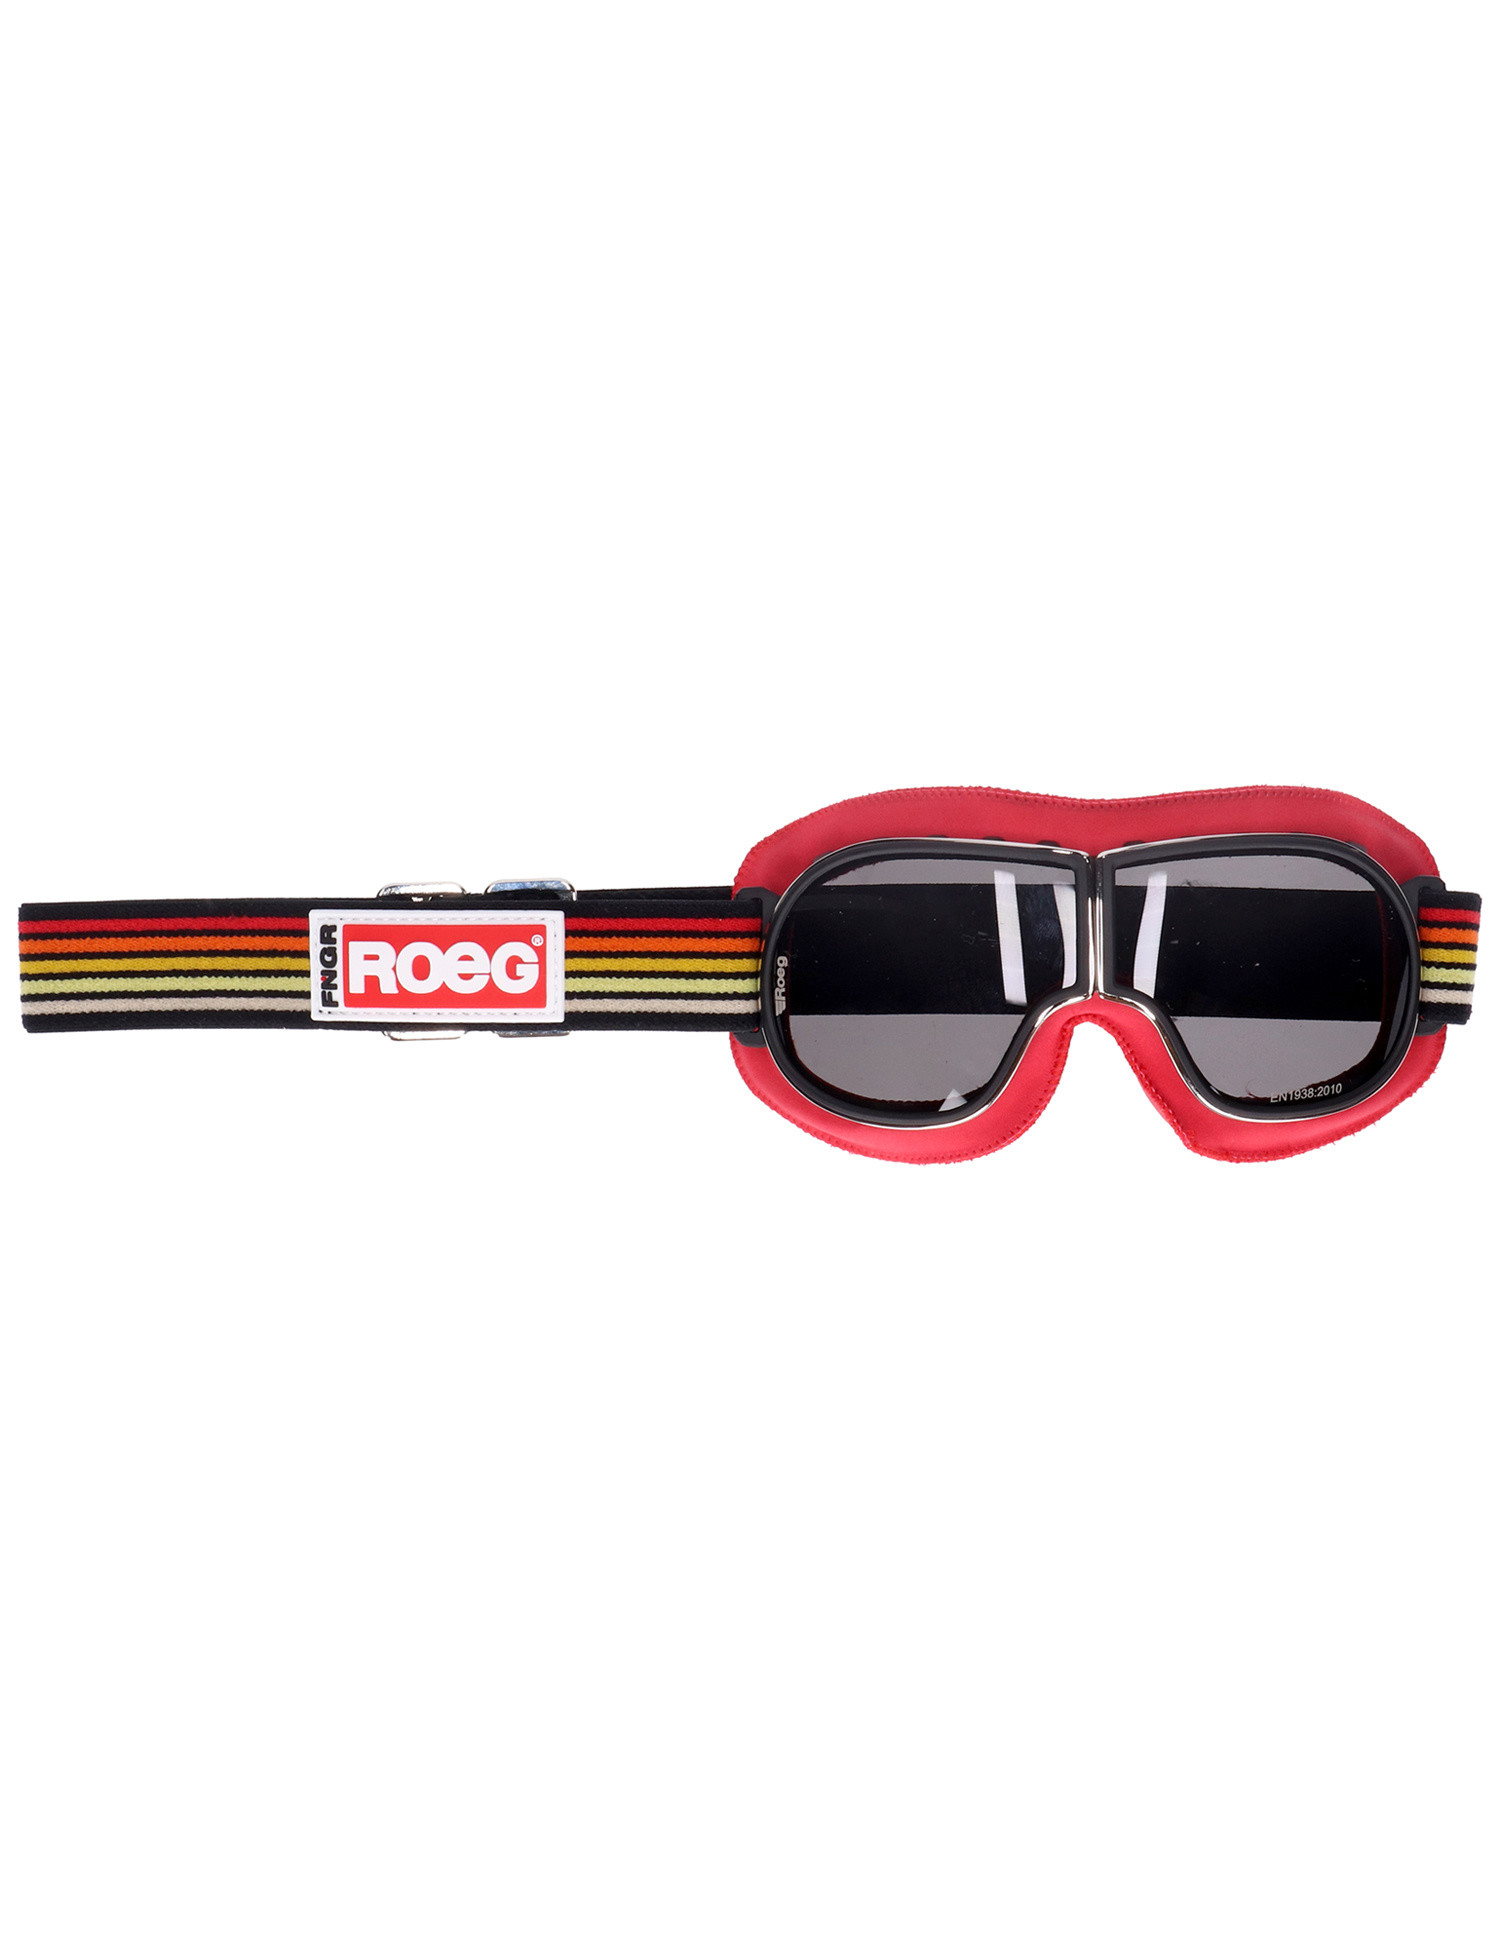 Roeg Jettson Foundry goggle black/yellow/red